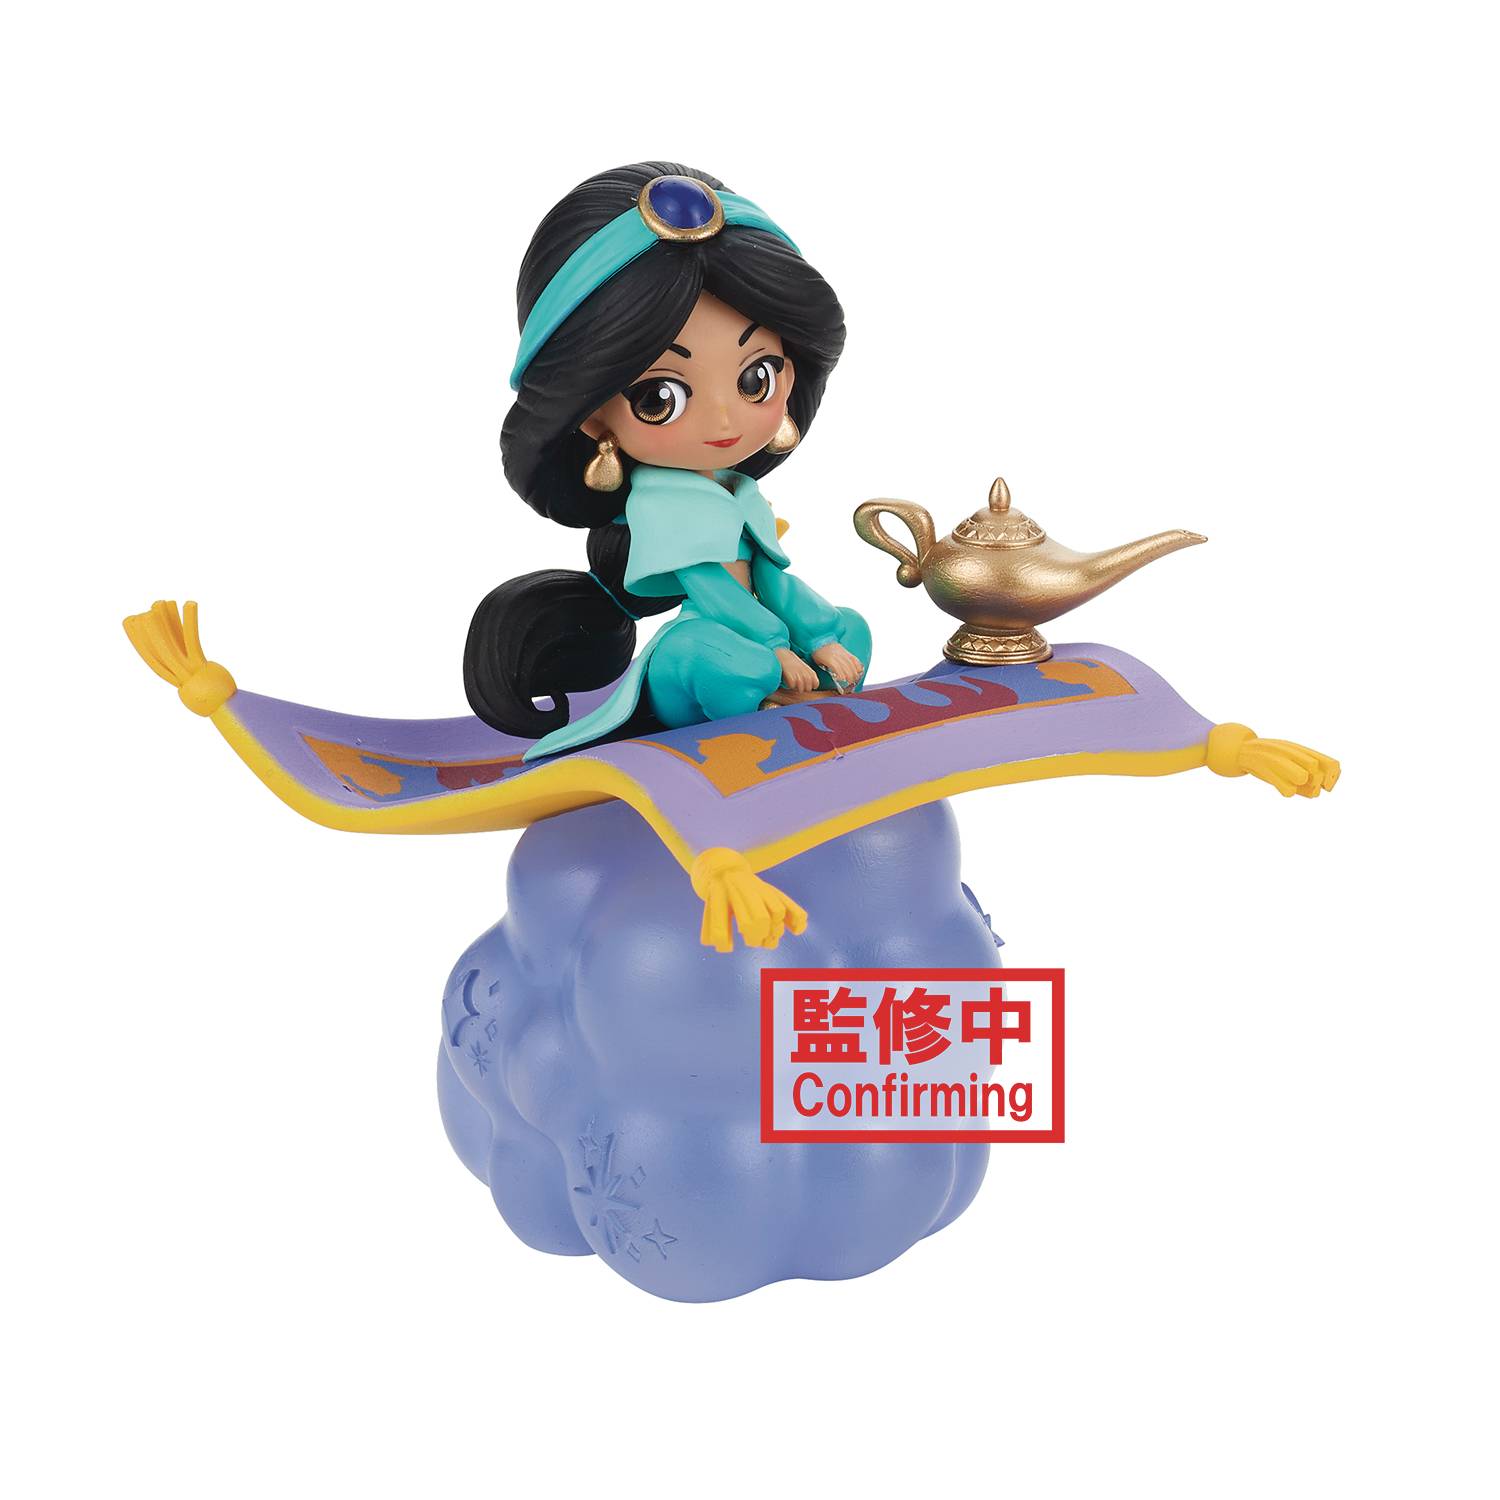 DISNEY CHARACTERS Q-POSKET STORIES JASMINE FIG VER A (C: 1-1